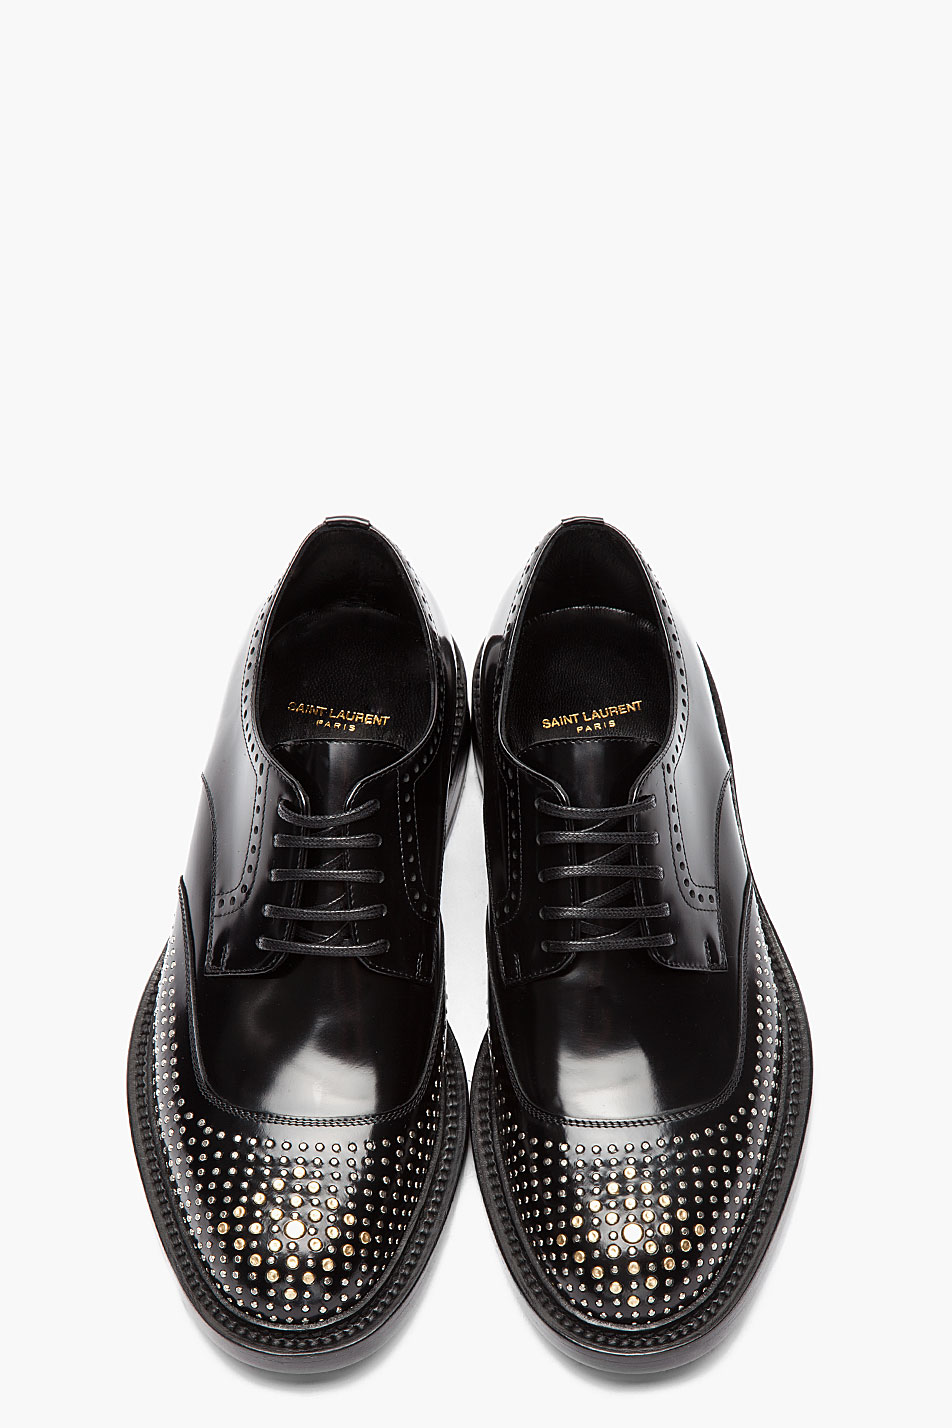 a Sneak Peek at the Newly Rebranded Saint Laurent Collection | SOLETOPIA